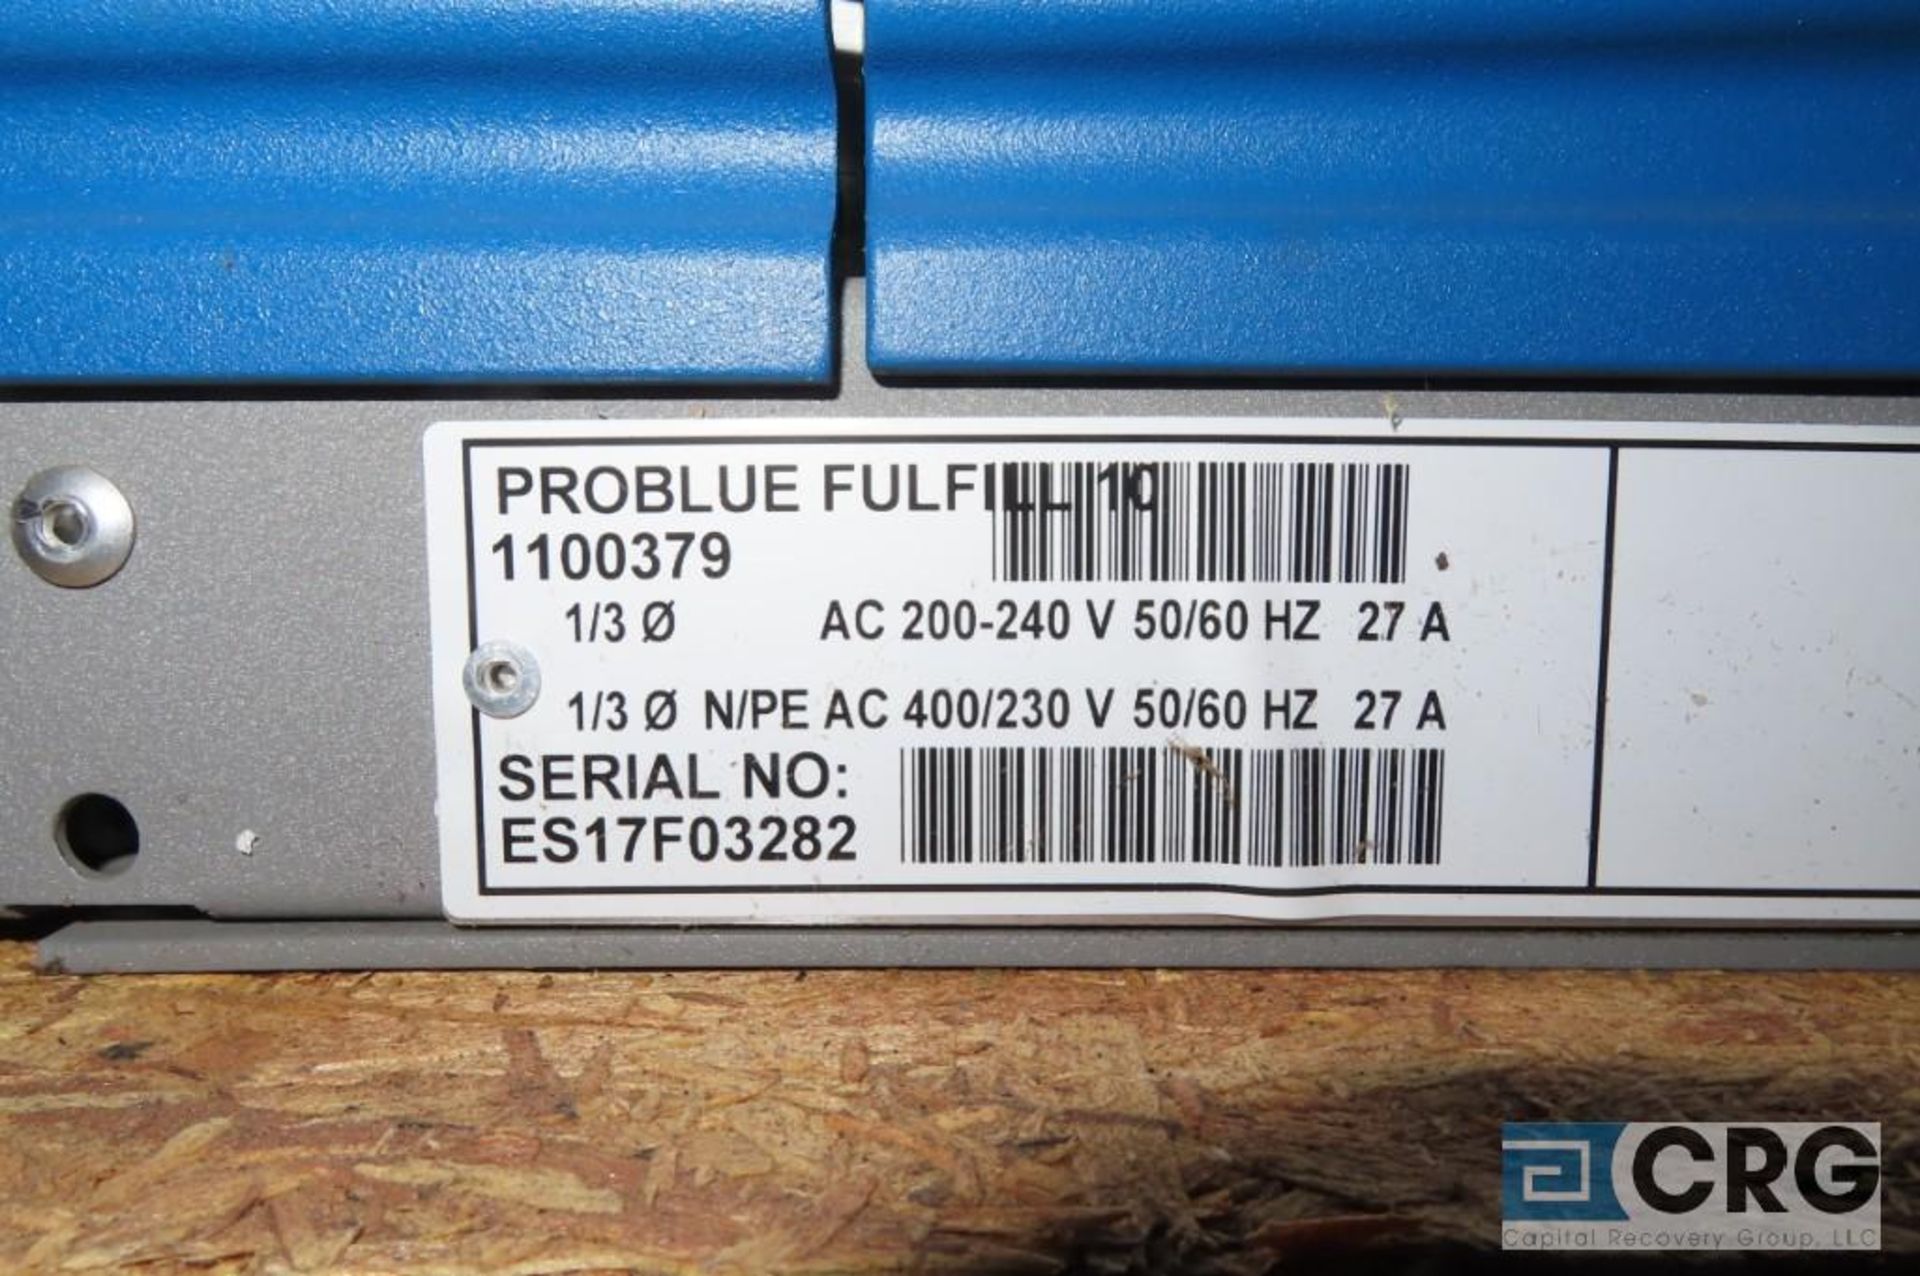 Nordson Pro Blue 10 gluer, s/n ES17F03282 (never installed) - Location: Finished Warehouse - Image 2 of 2